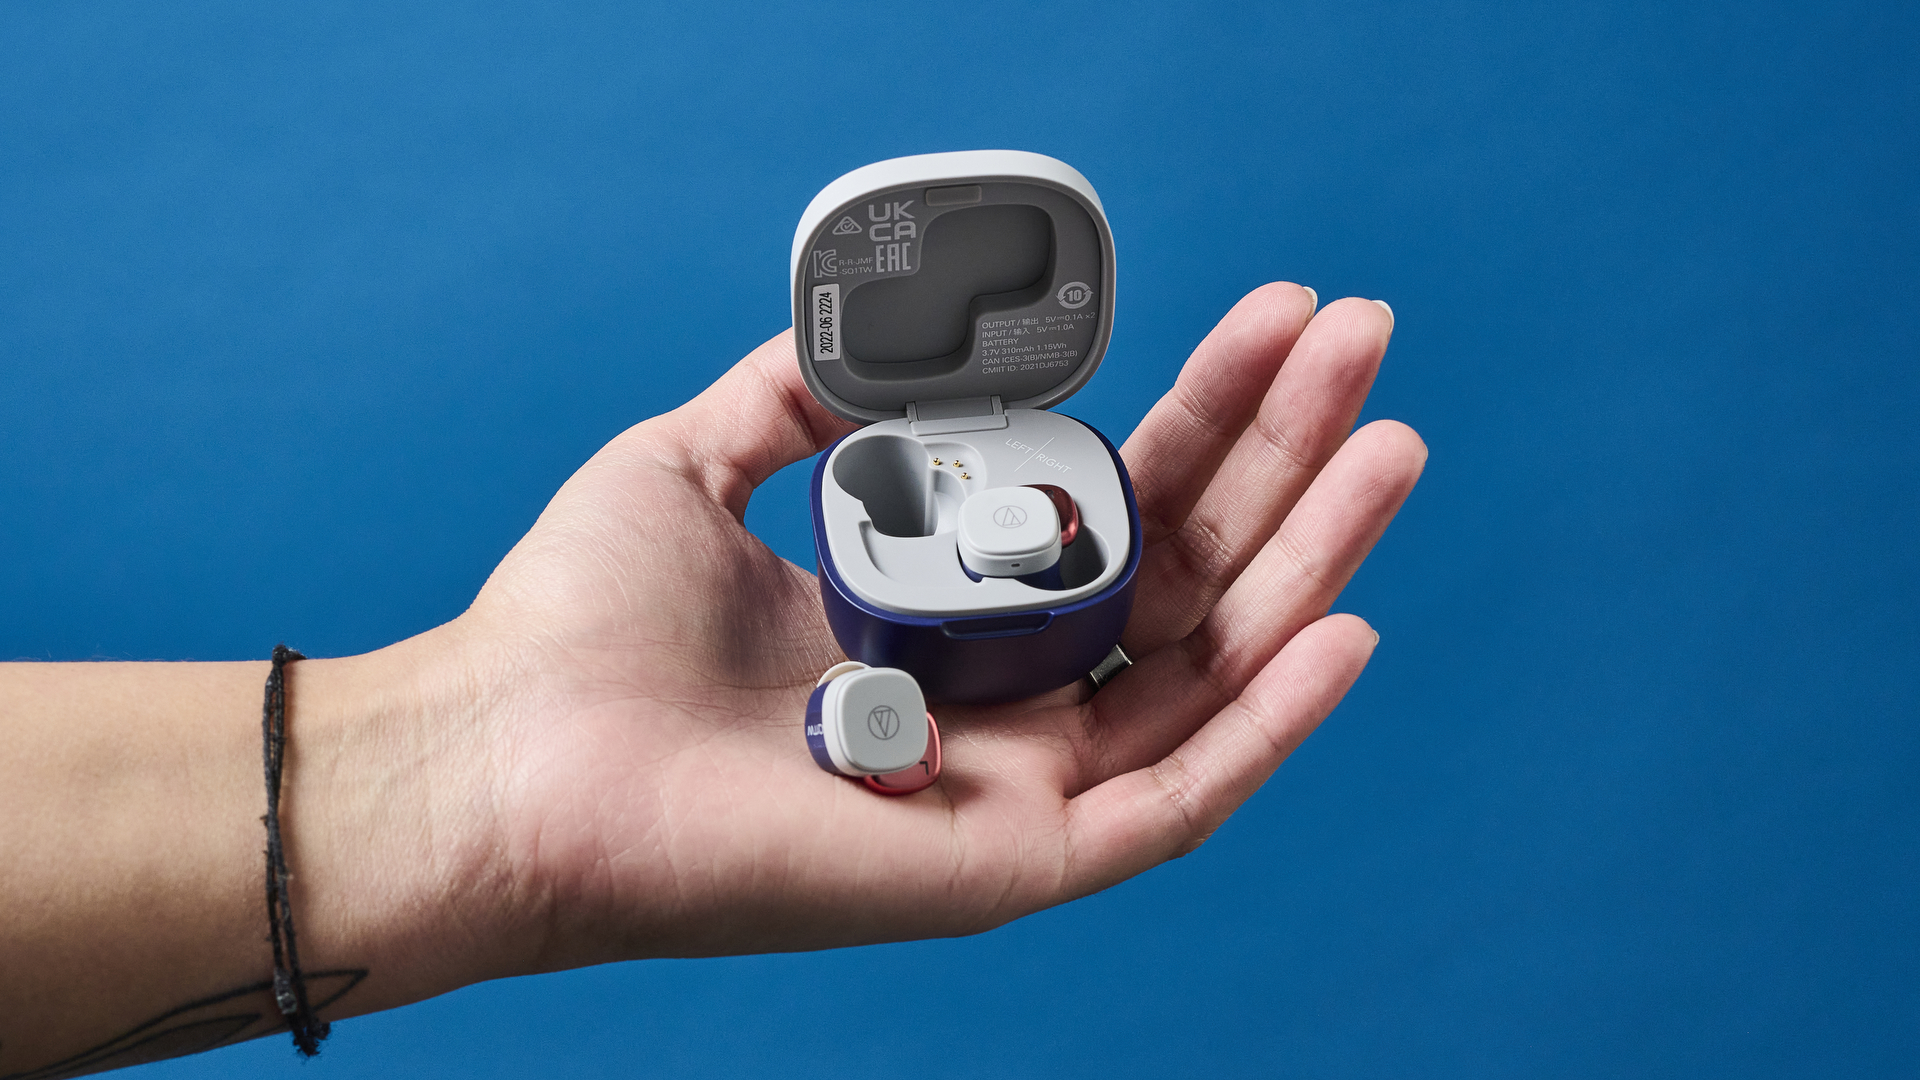 A pair of Audio-Technica ATH-SQ1TW wireless earbuds and their case sitting in the palm of a person's hand